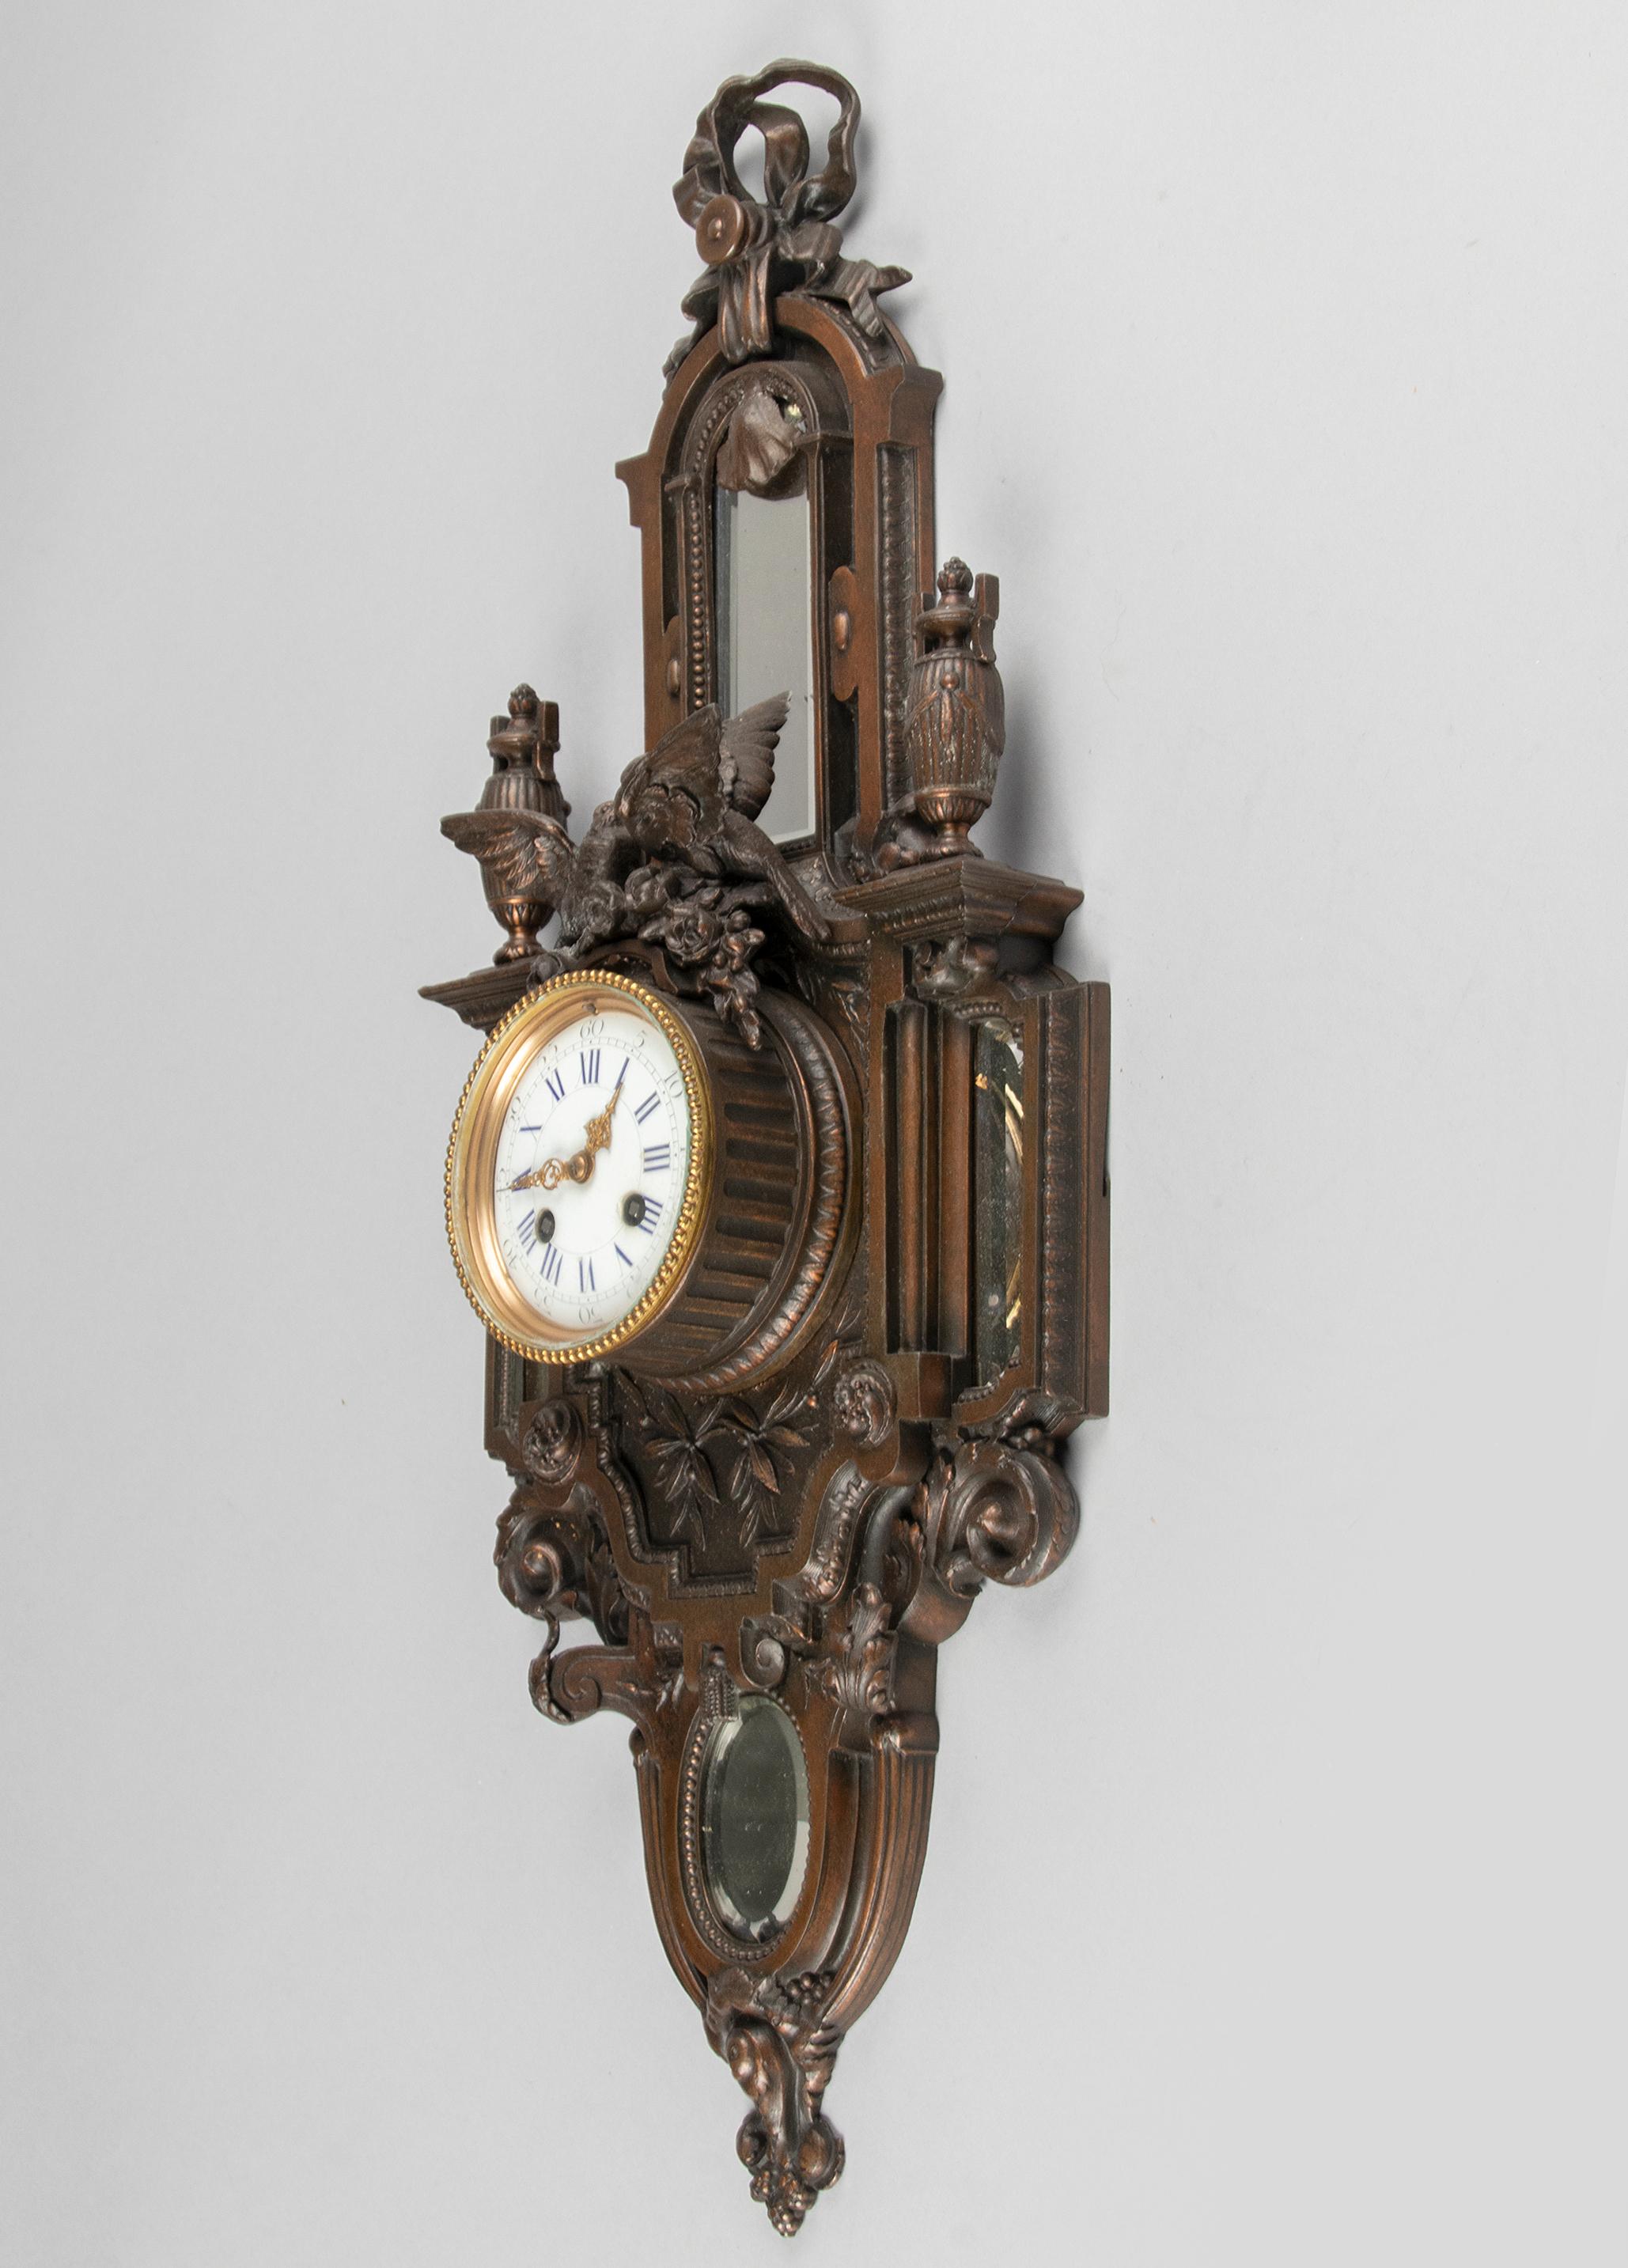 A Louis XVI style cartel wall clock, made in France circa 1880-1890. The case is made of casted spelter (metal alloy) and fitted with four beveled mirror glass. The dial is covered with an enameled finish. Above the clockwork a birdsnest. Richly